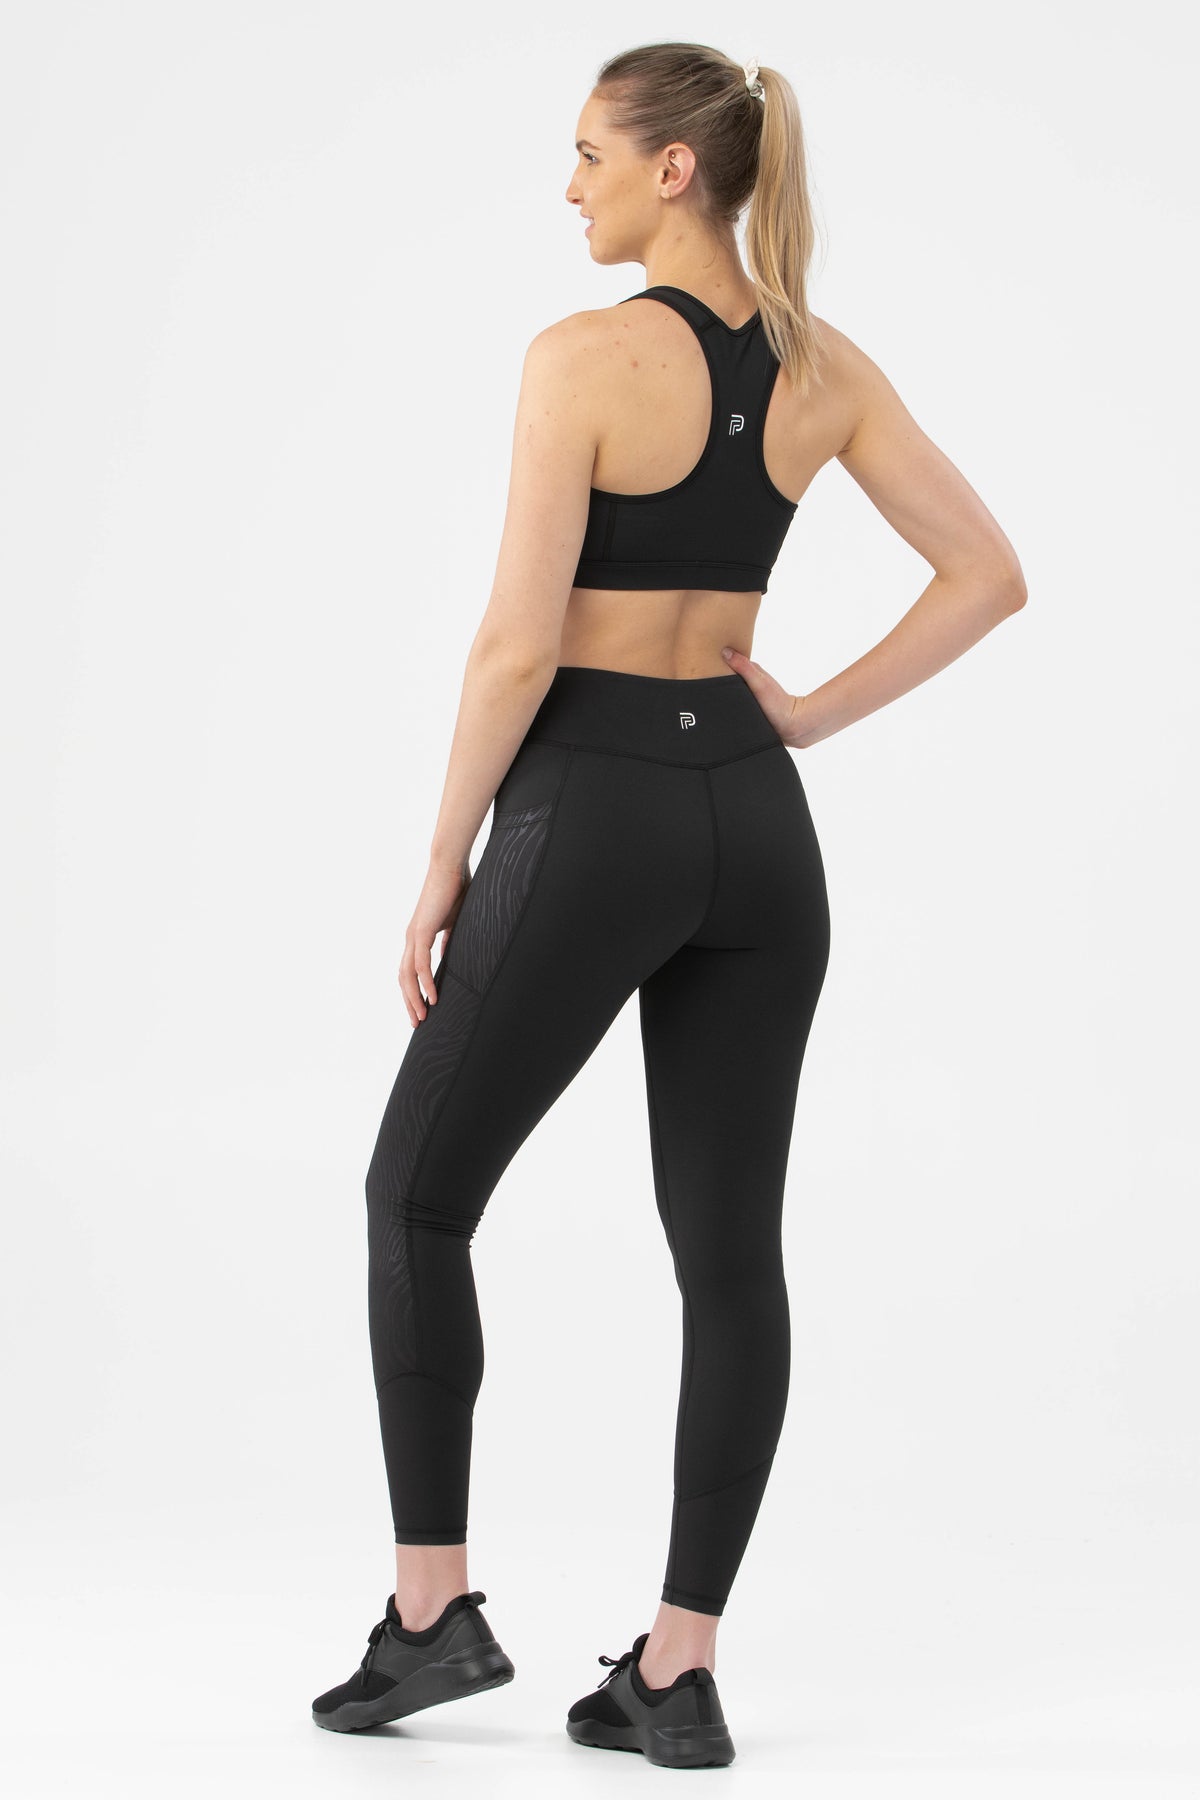 Fitphyt - True or False? The better the workout outfit, the better